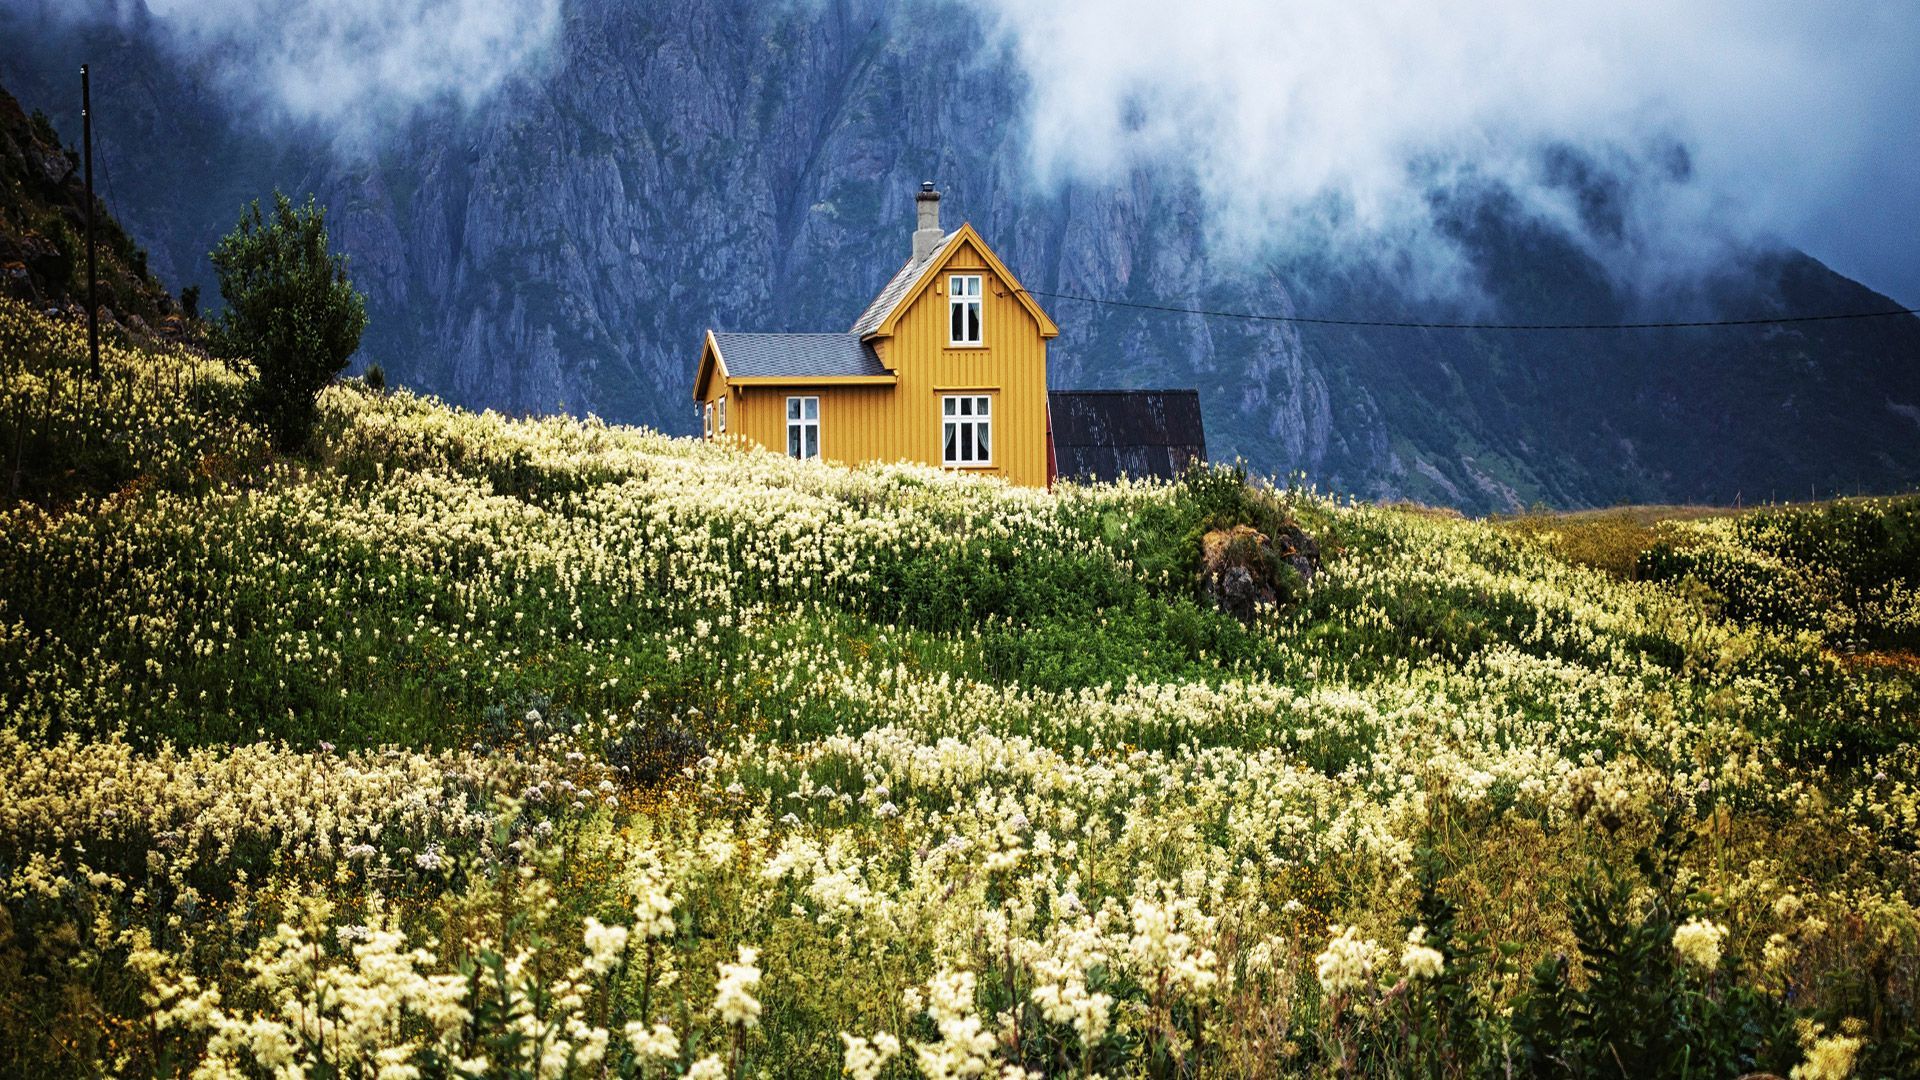 A yellow house on a hillside with flowers and mountains in the background. - Cottagecore